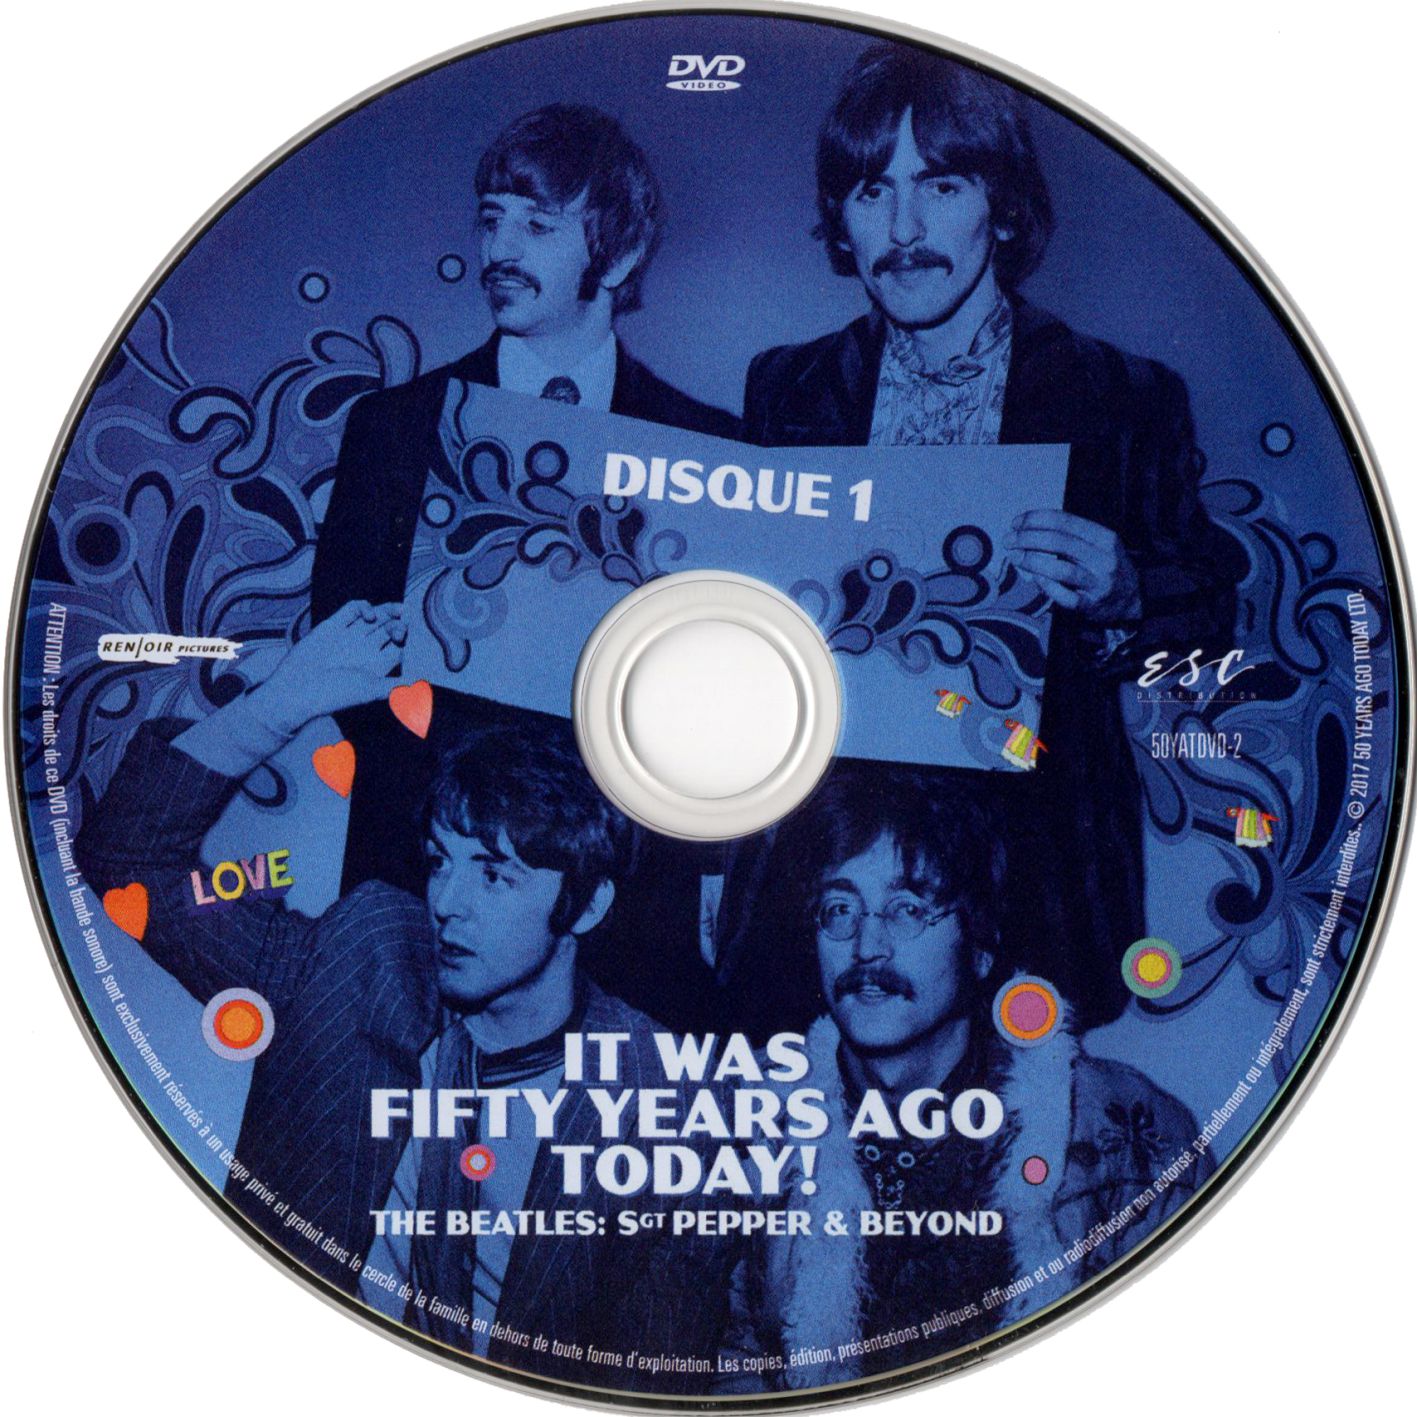 It was fifty years ago today Disc 1